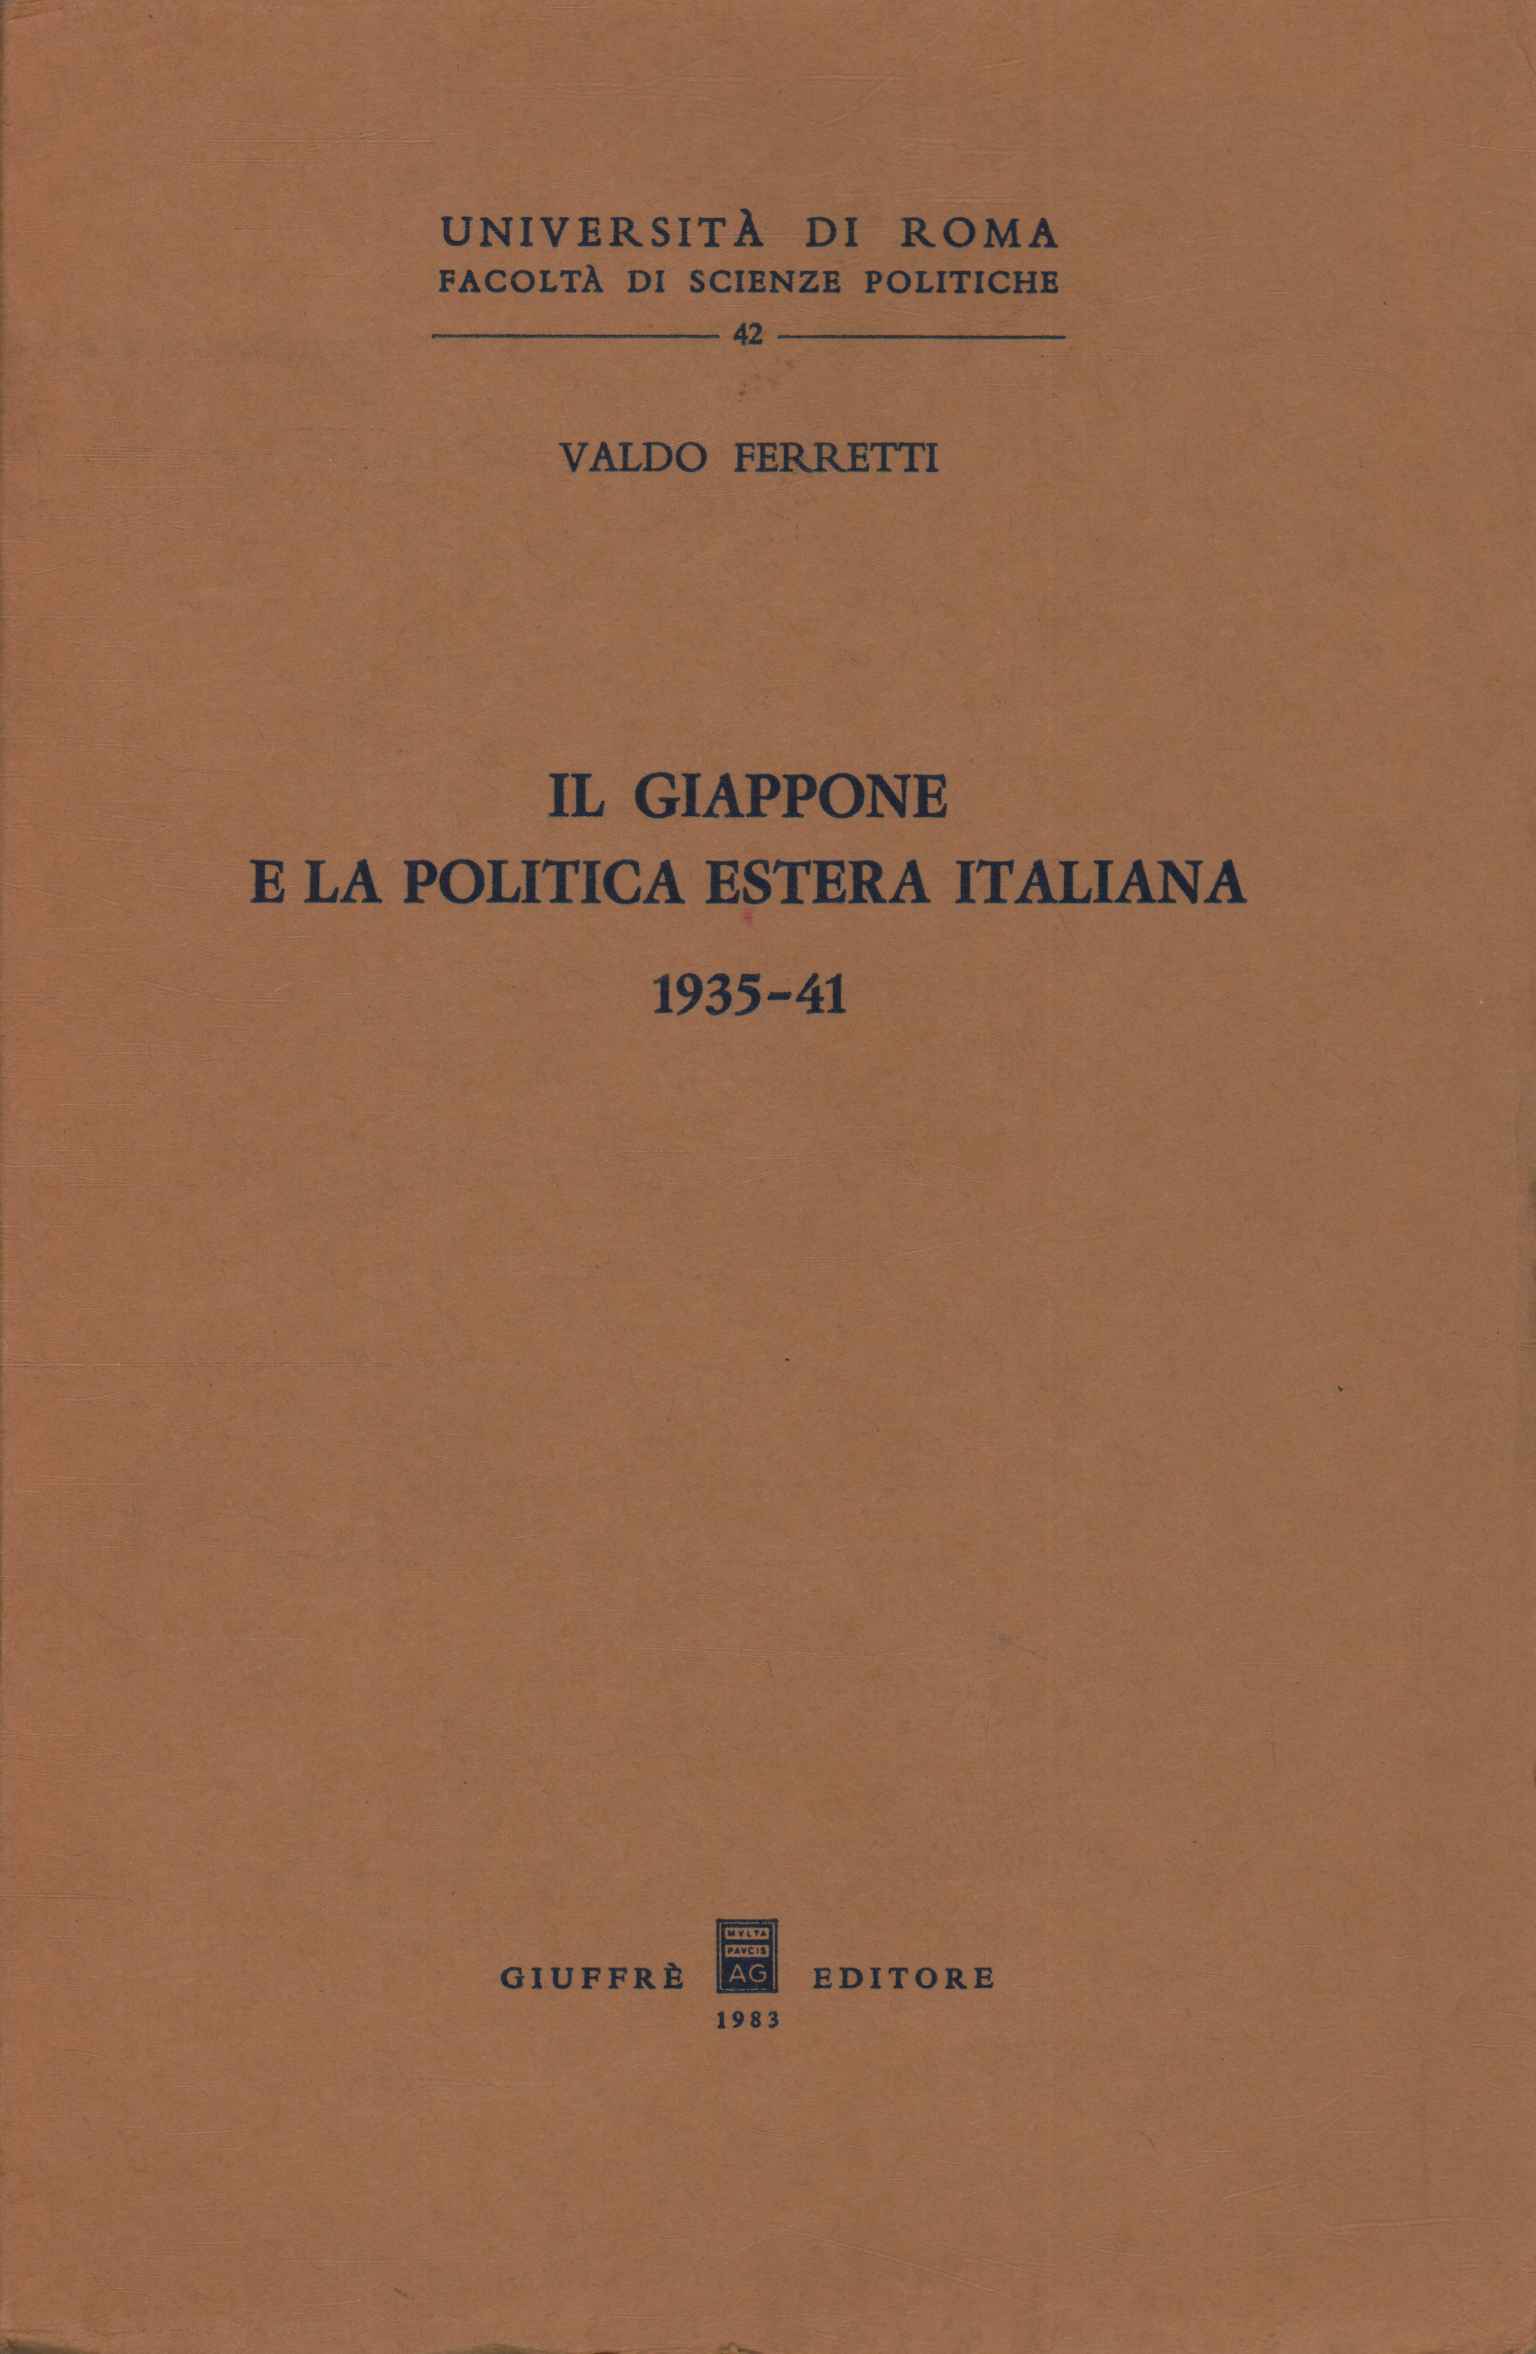 Japan and Italian foreign policy